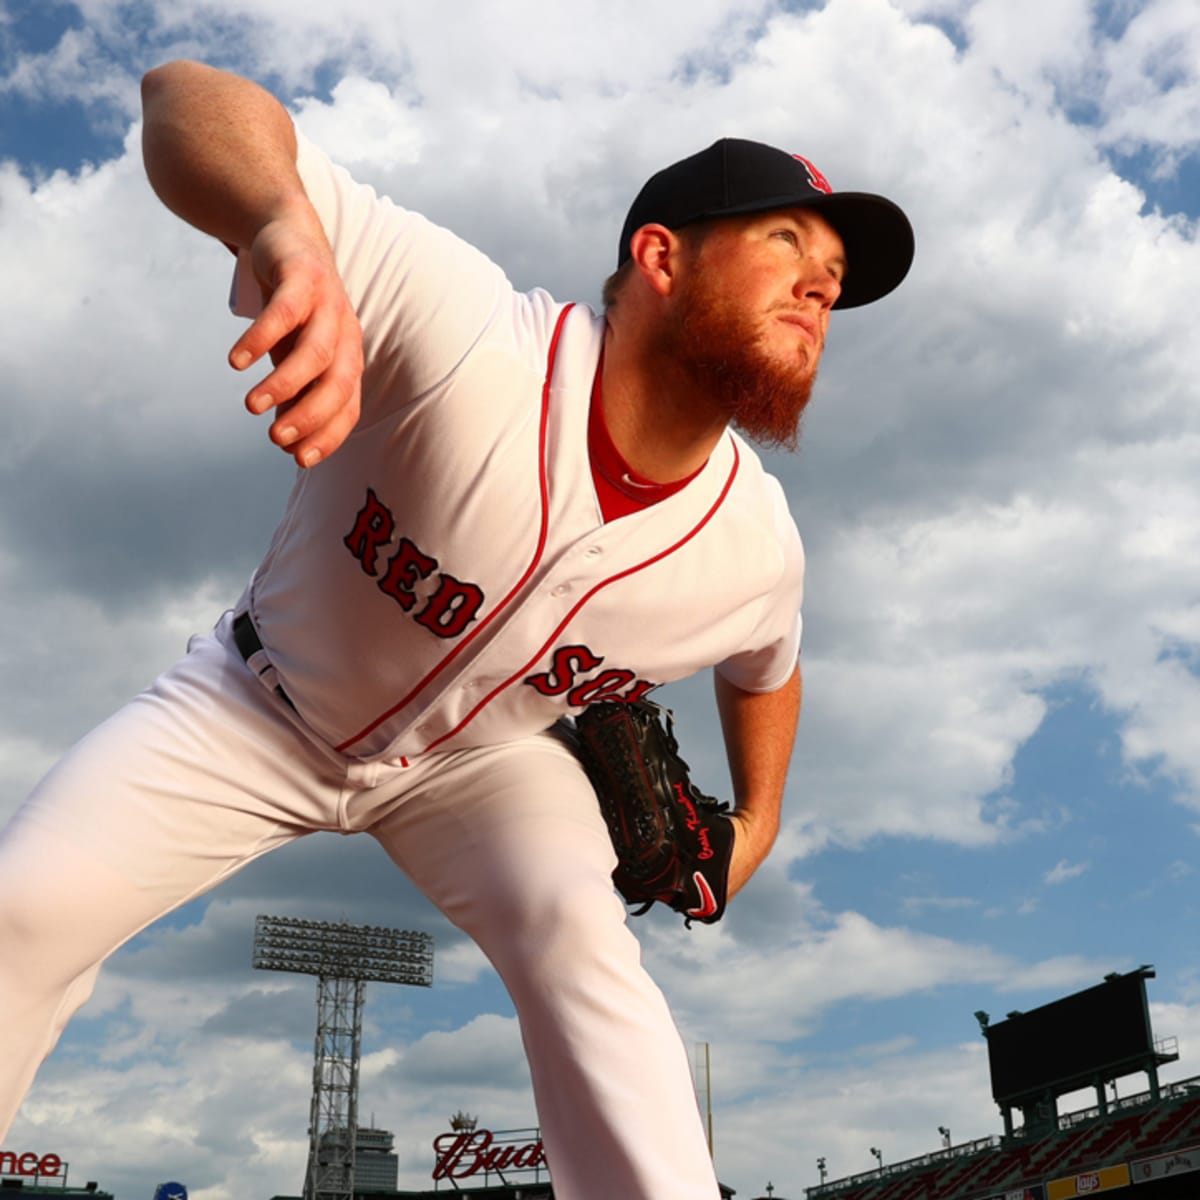 The Phillies' Craig Kimbrel knows the closer role has changed, but